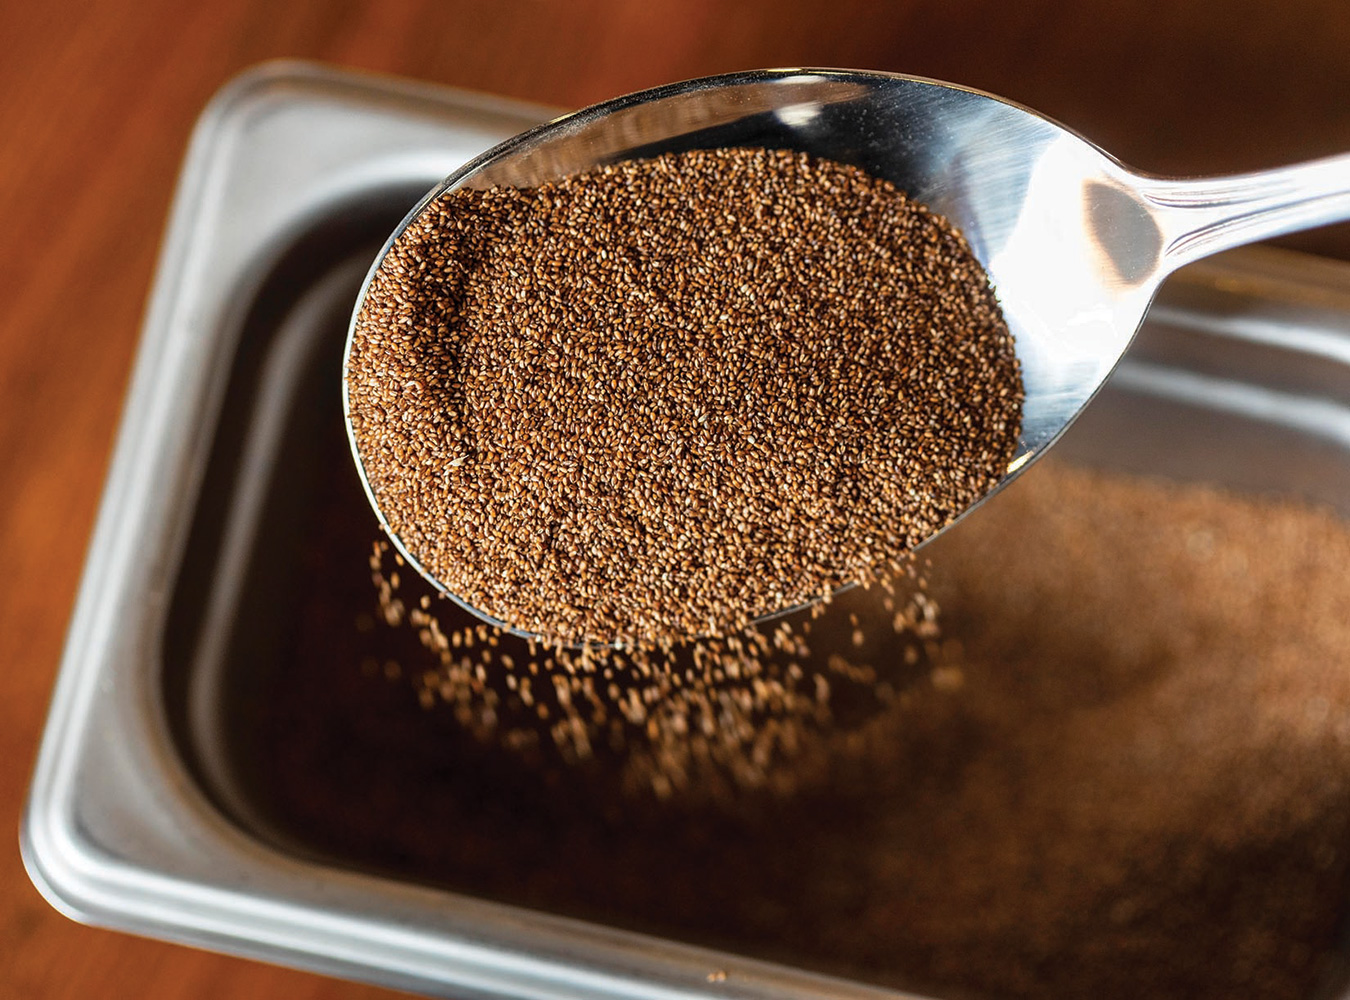 Ancient grain teff, also known as lovegrass, is naturally gluten free and full of micronutrients.